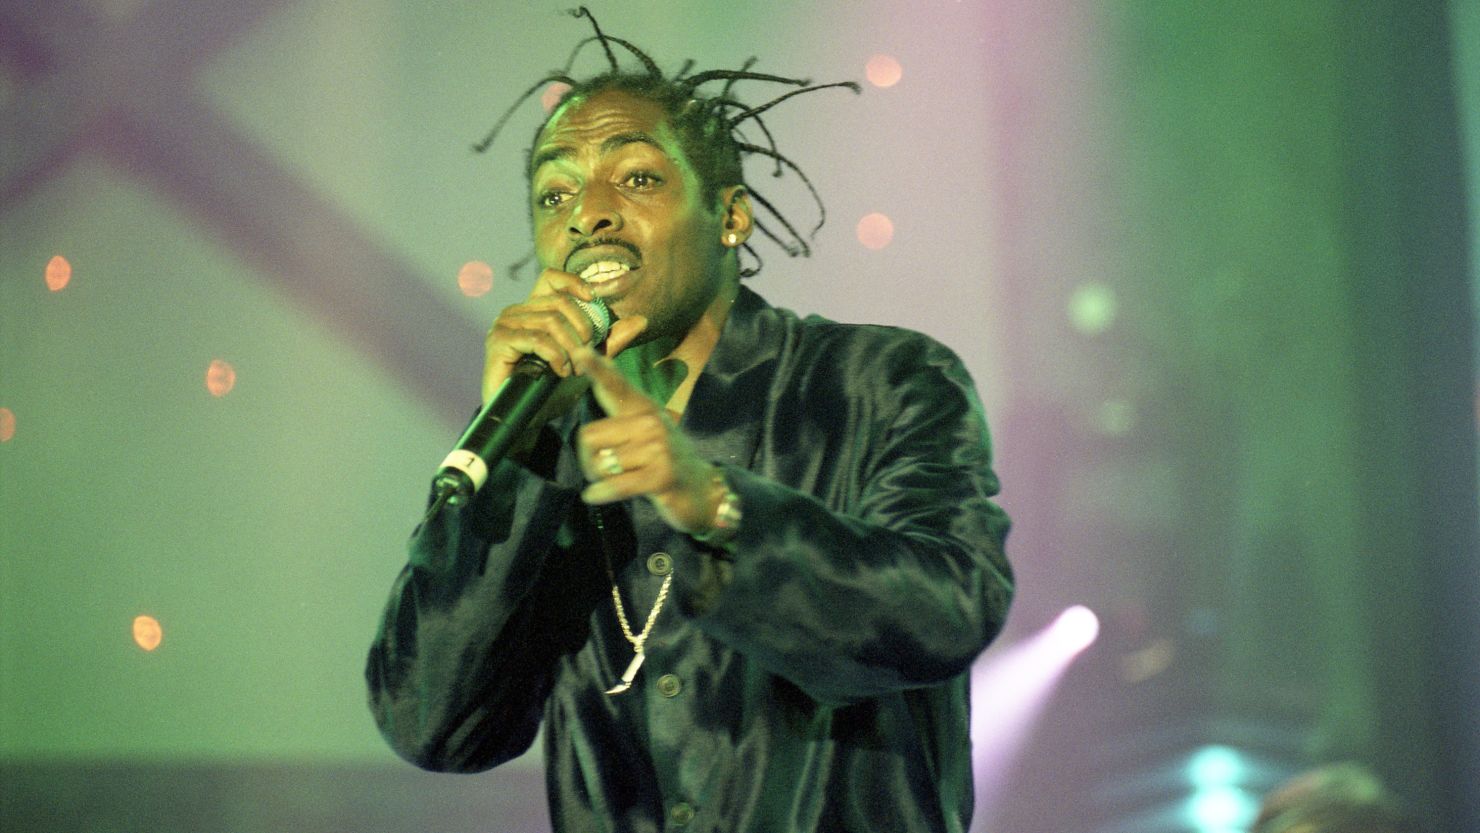 Coolio winner of best International hip hop act, at the 1997 MOBO Awards in London on November 10, 1997.